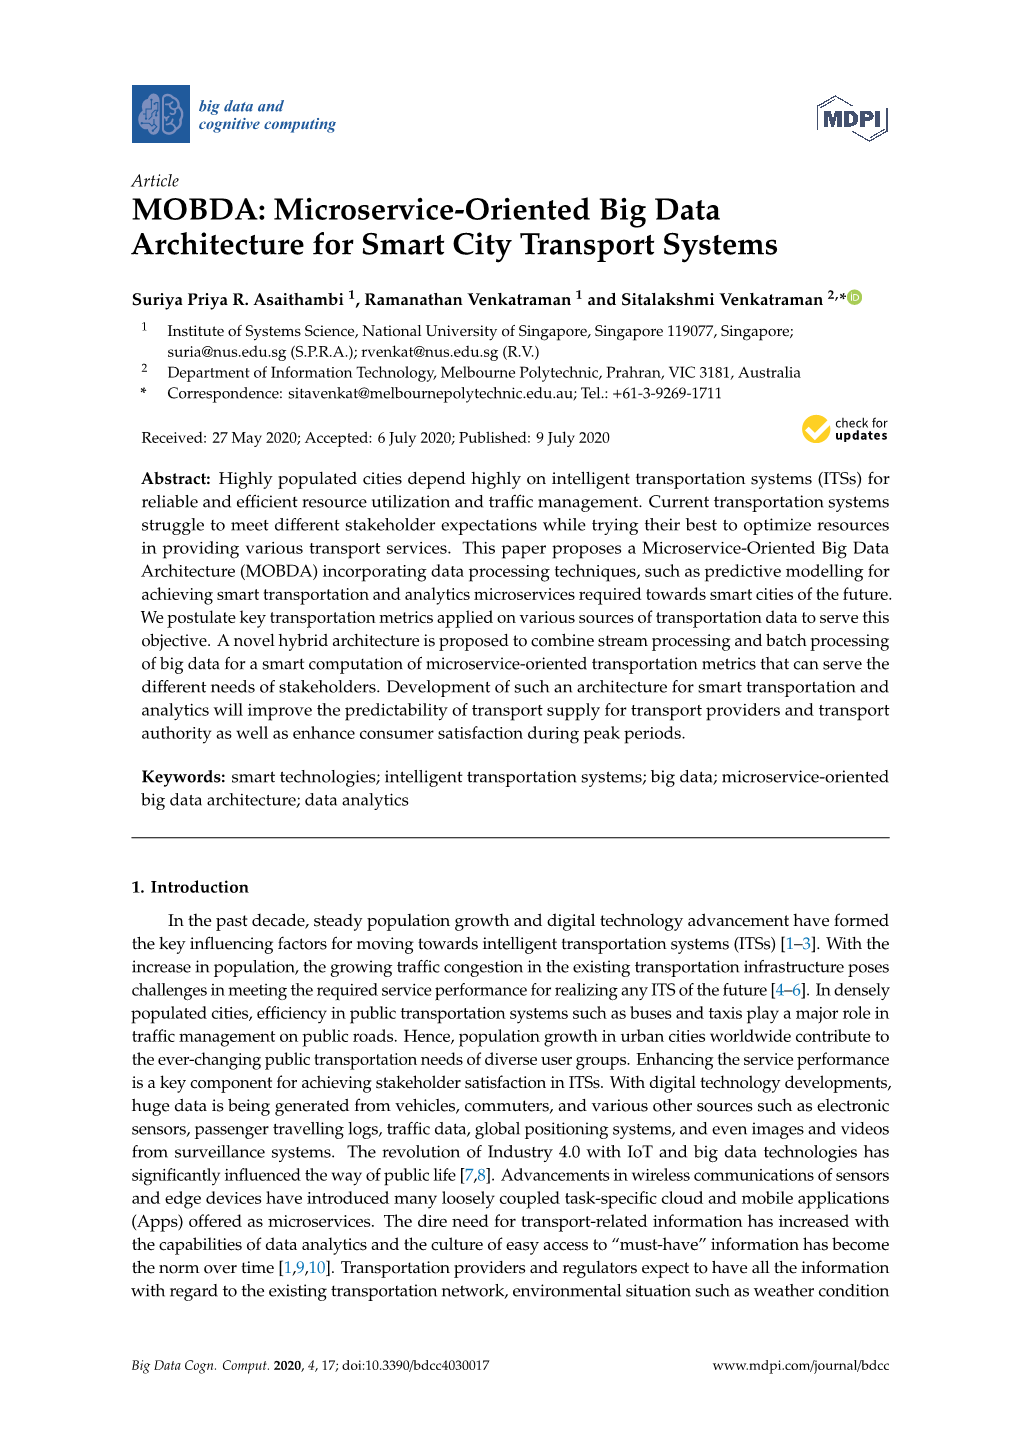 Microservice-Oriented Big Data Architecture for Smart City Transport Systems